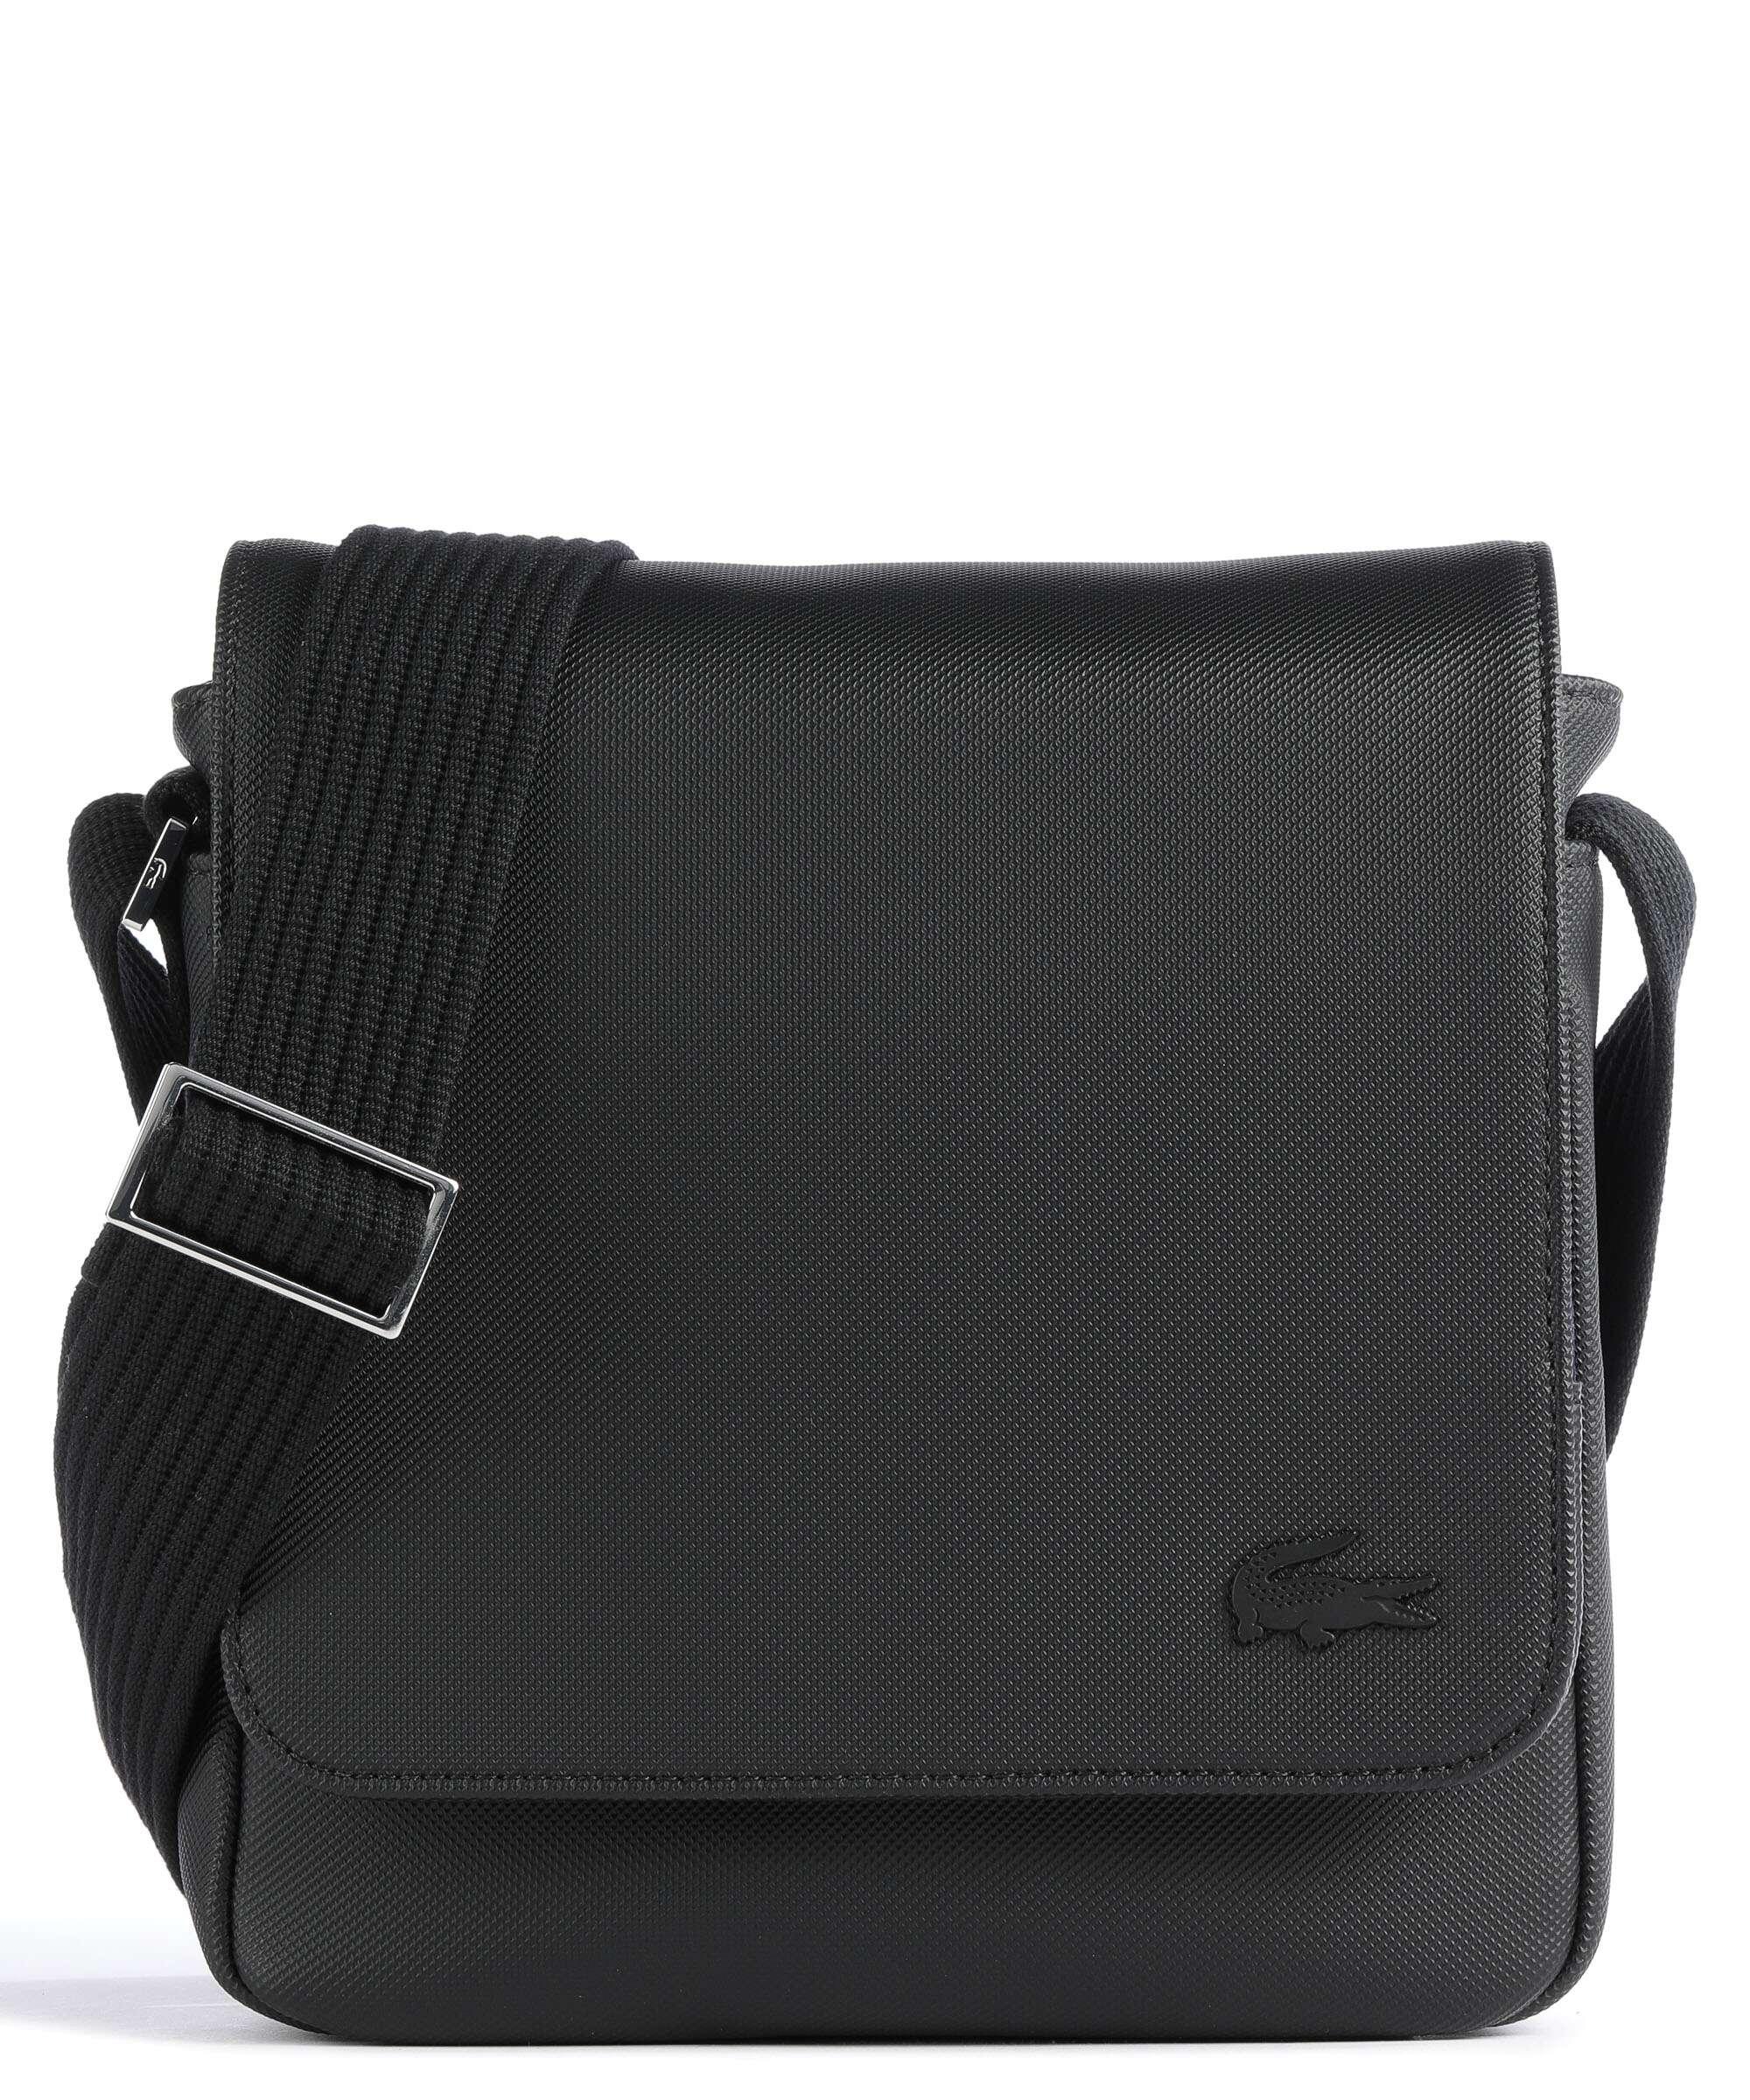 Latest Lacoste Bags & Handbags arrivals - Men - 16 products | FASHIOLA INDIA